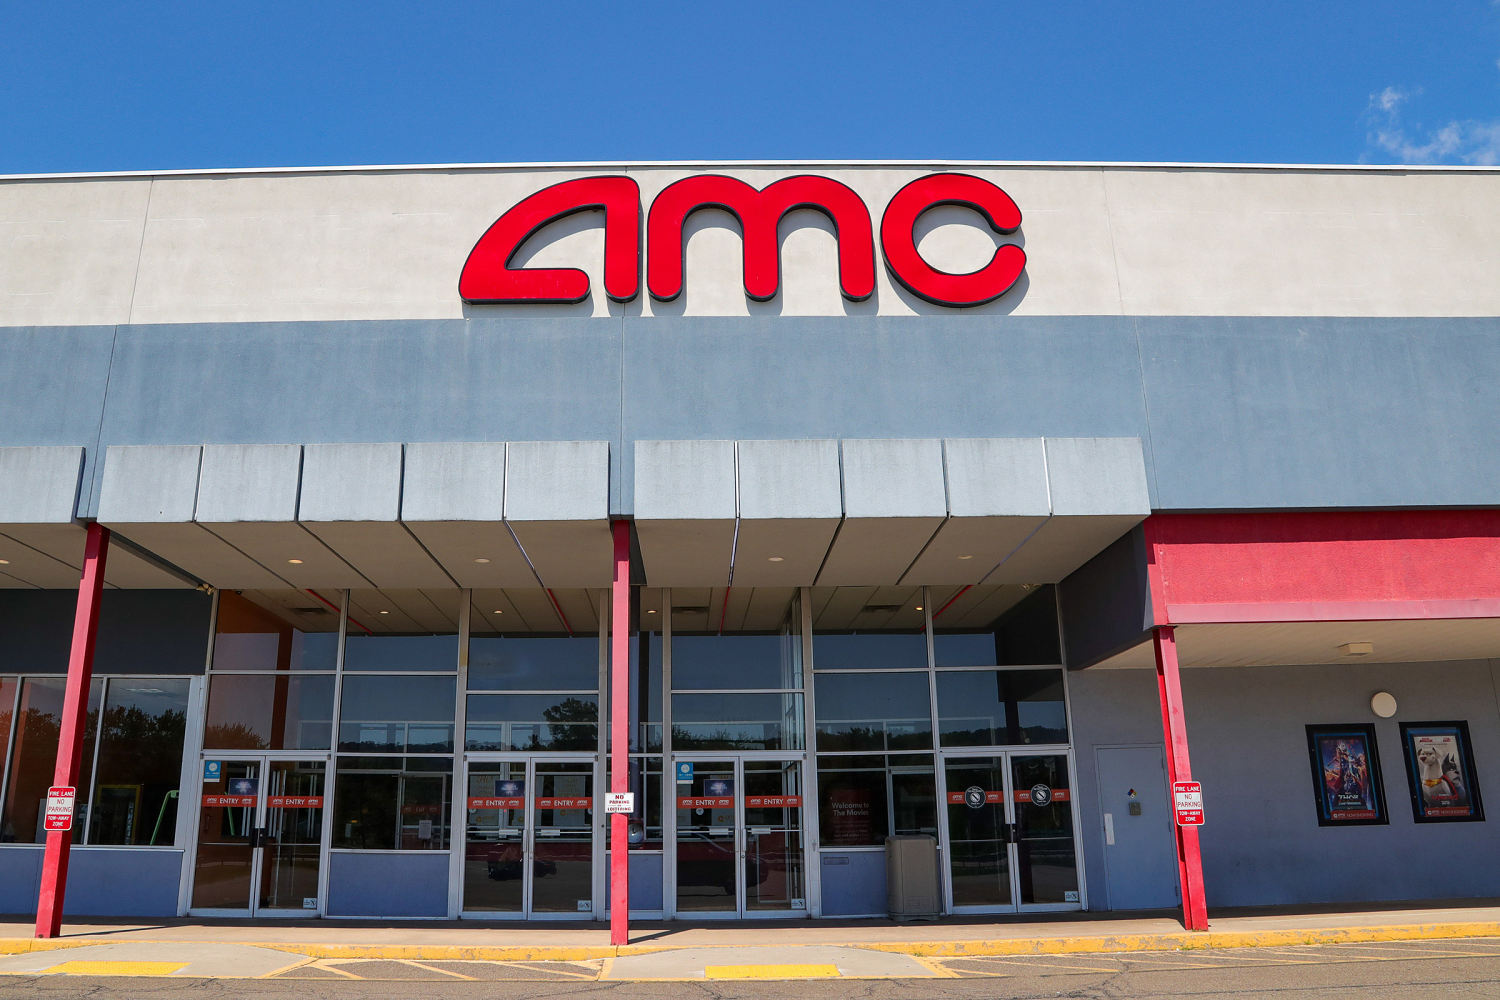 Meme stock mania is back: Why everyone is talking about GameStop, AMC and more again